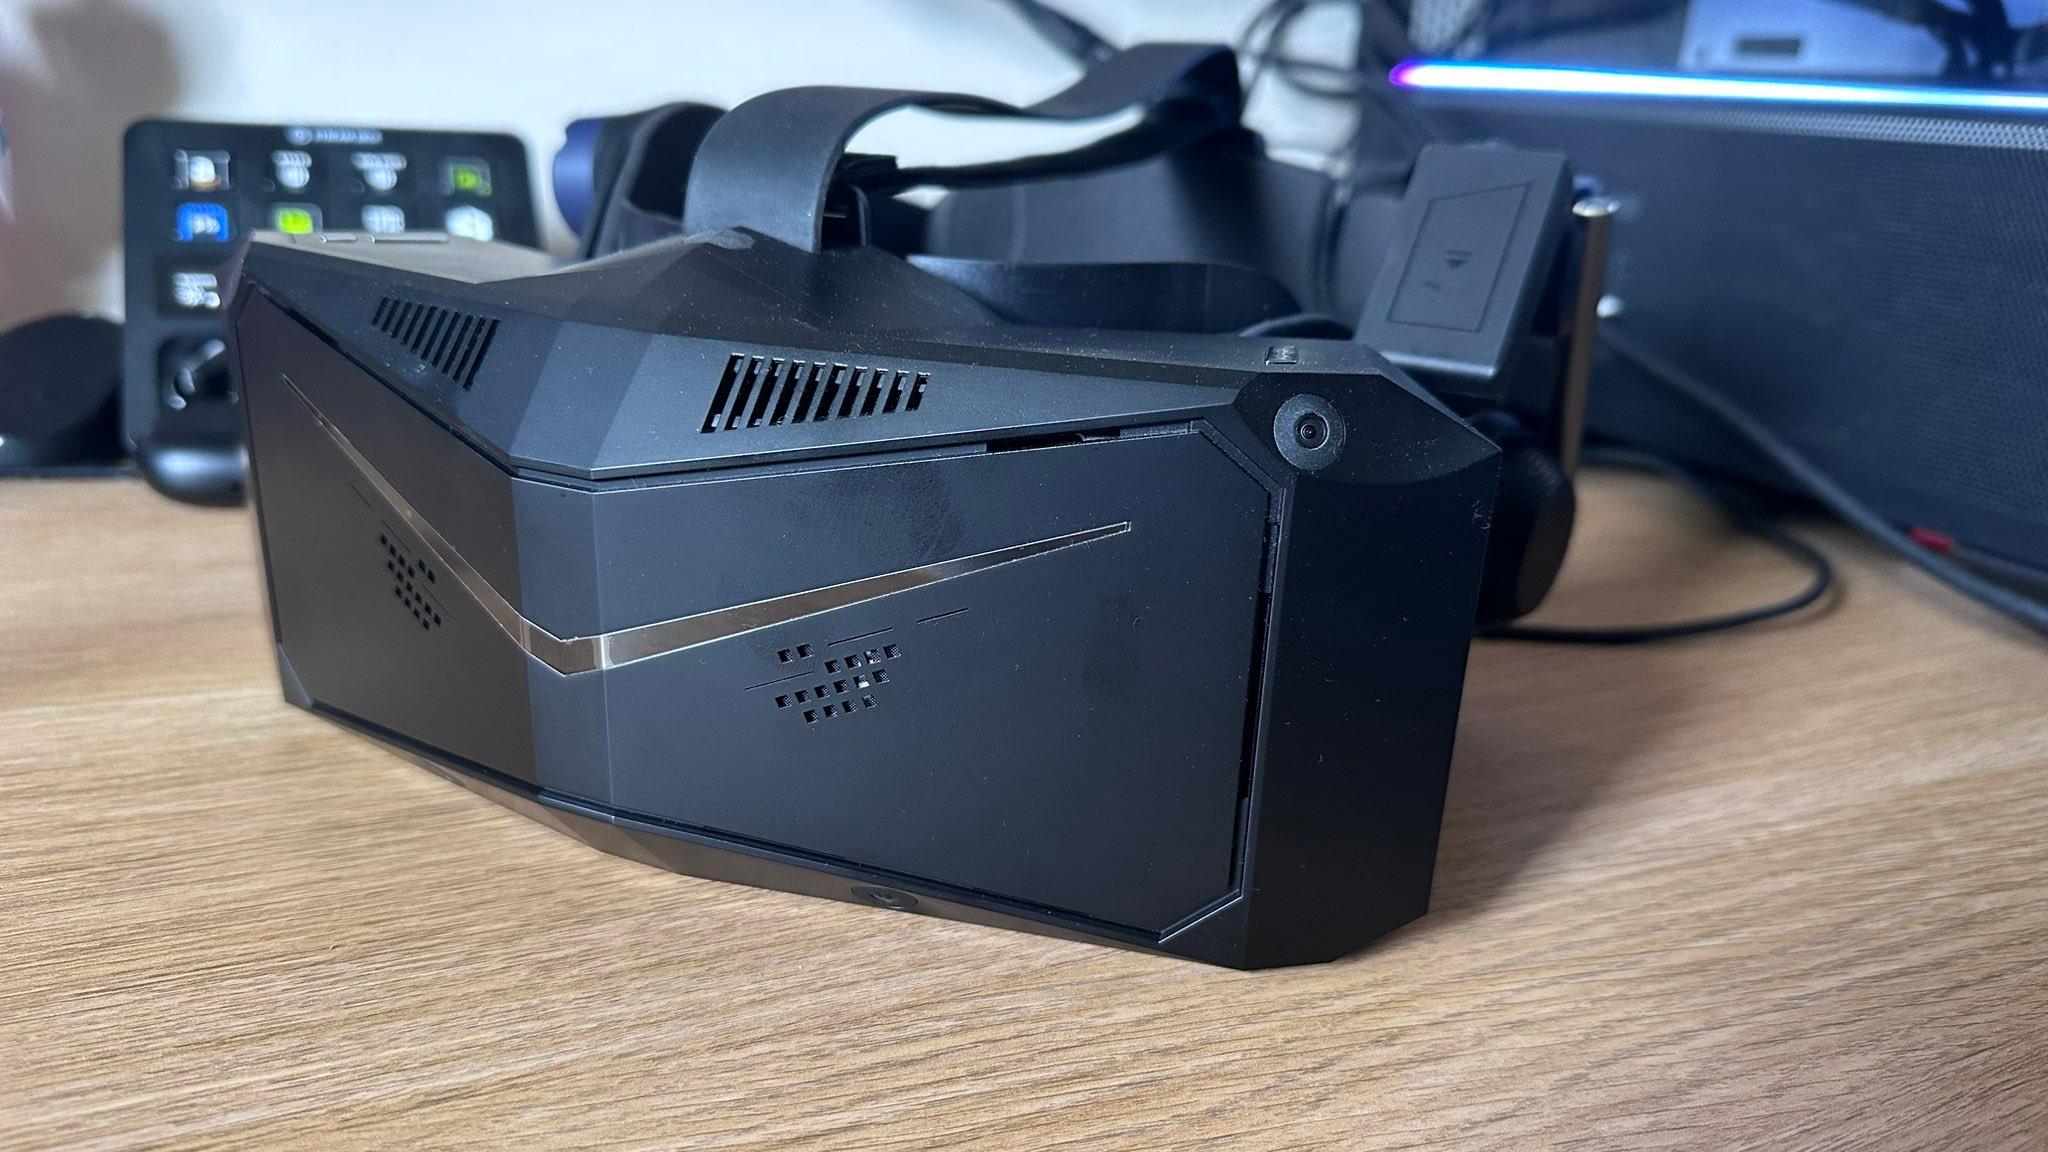 Pimax Crystal VR headset review